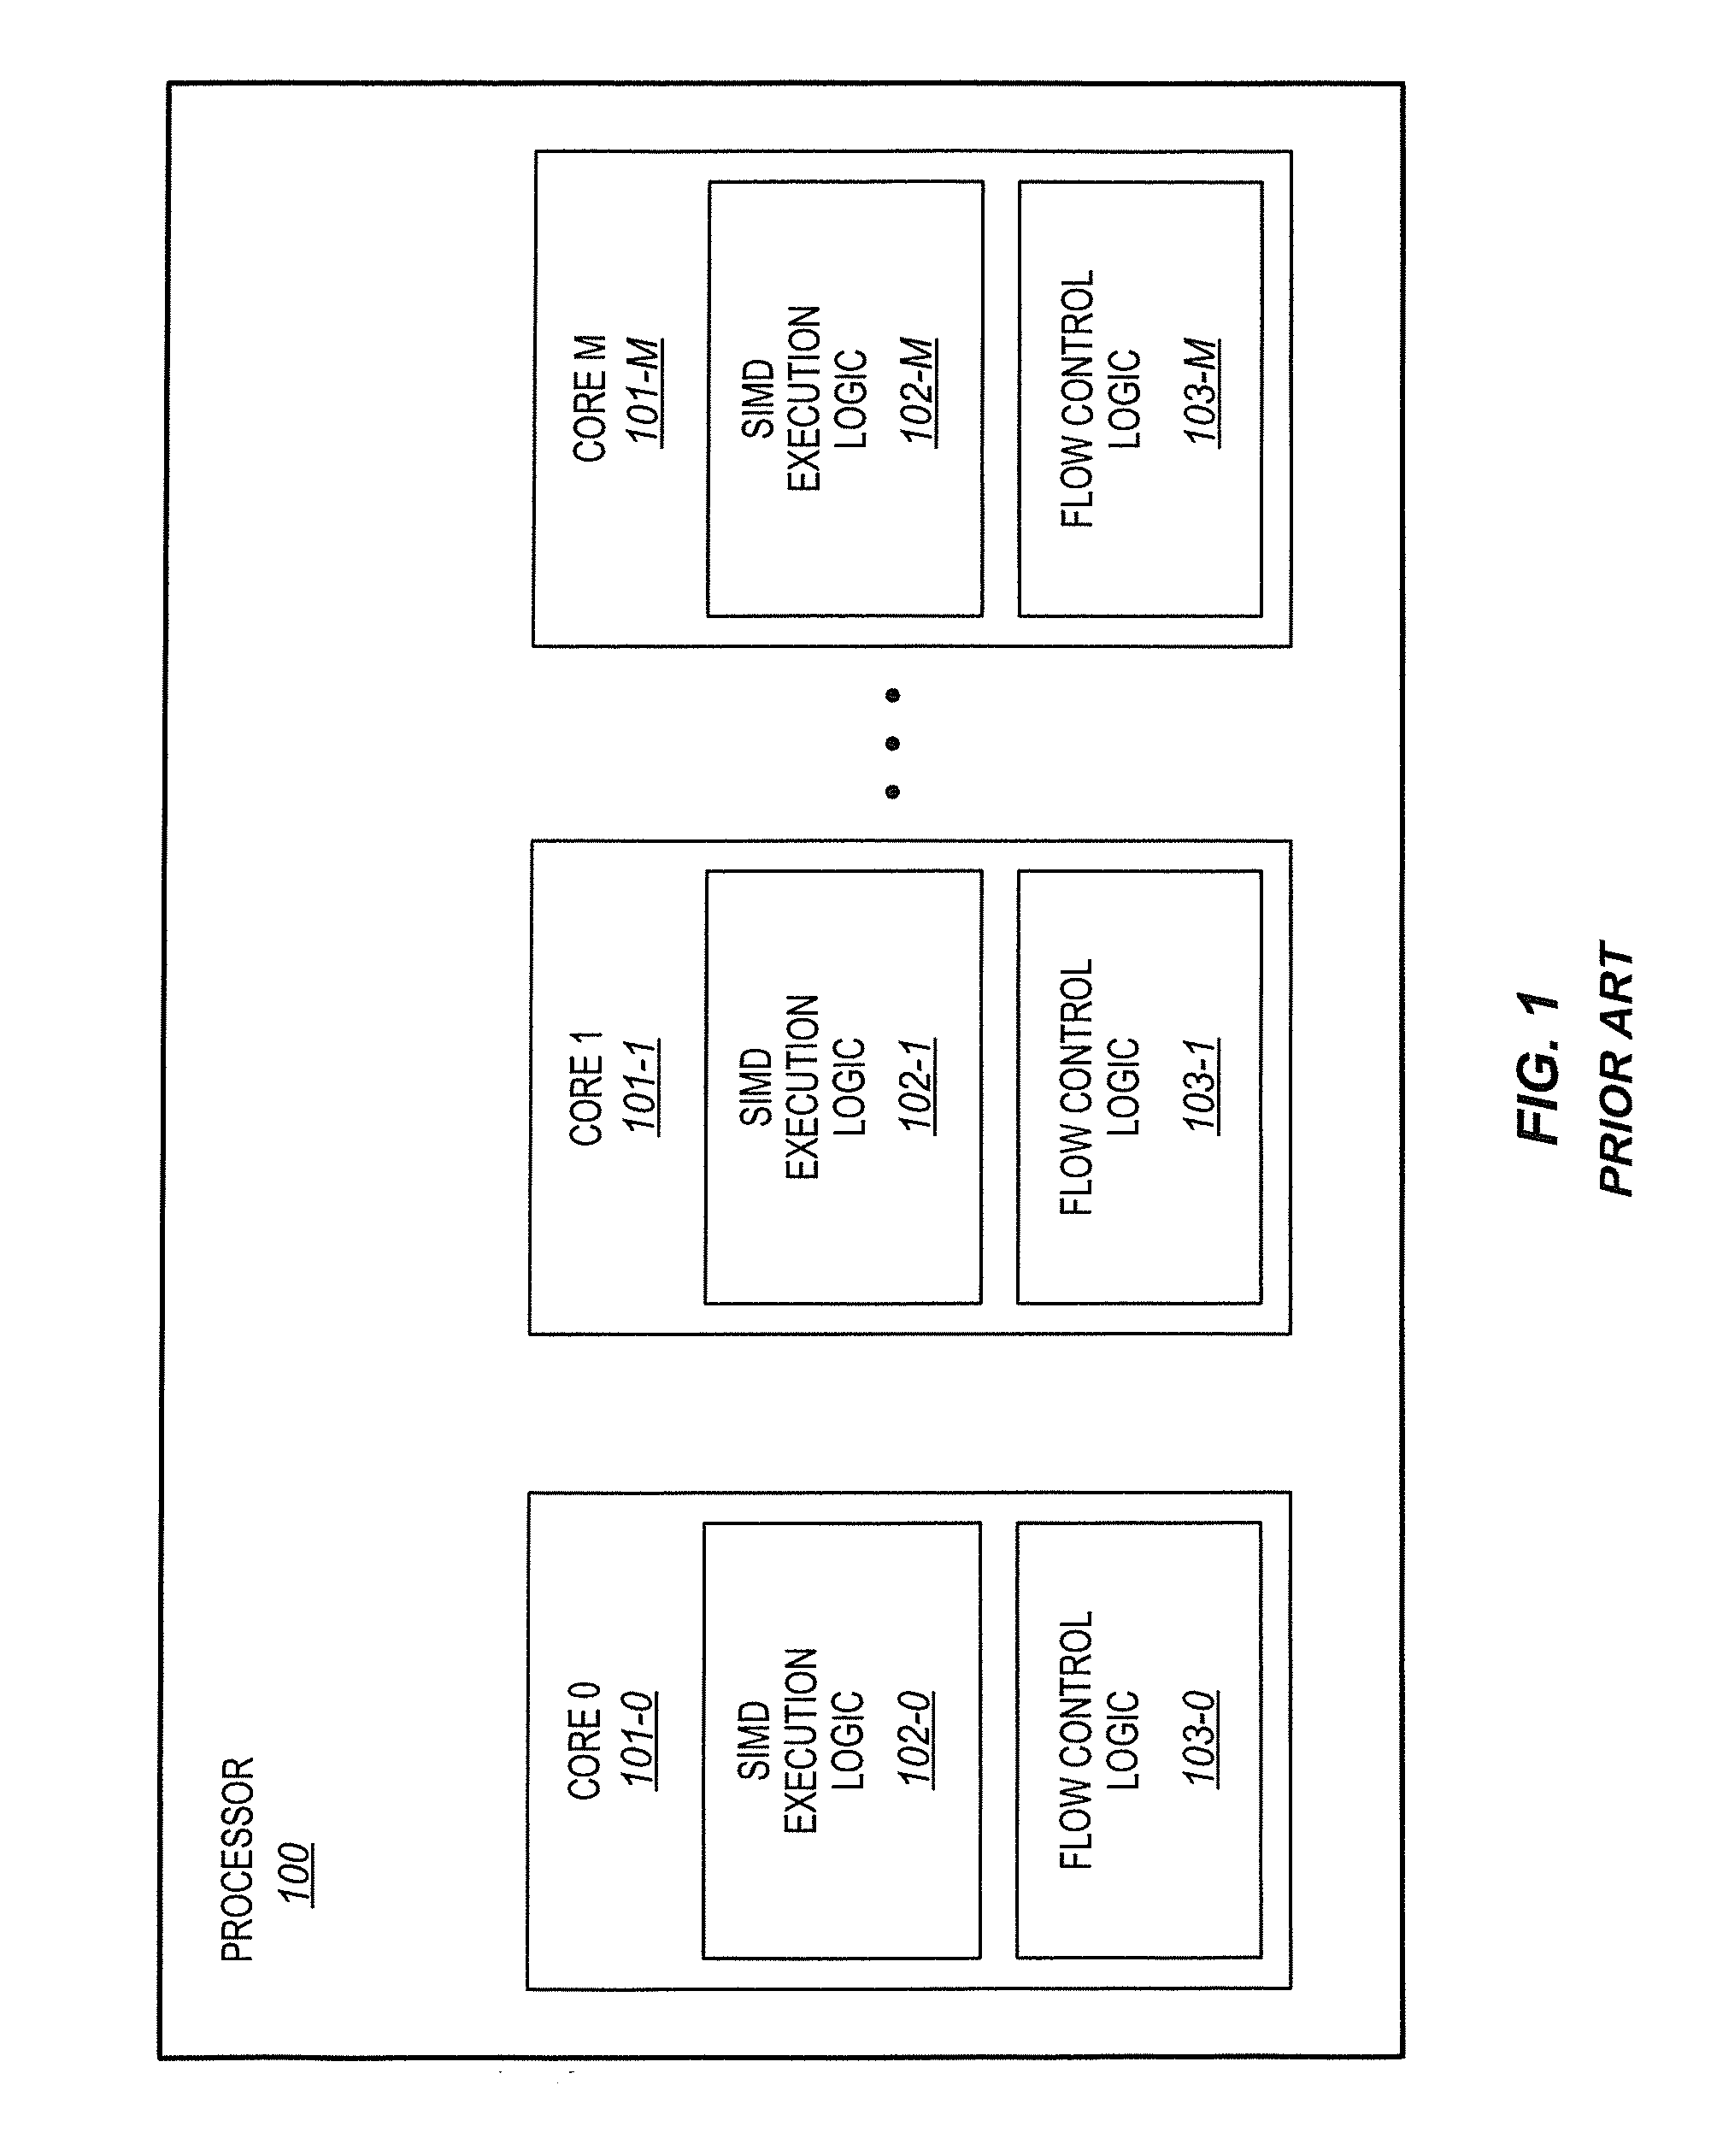 Processor having multiple cores, shared core extension logic, and shared core extension utilization instructions